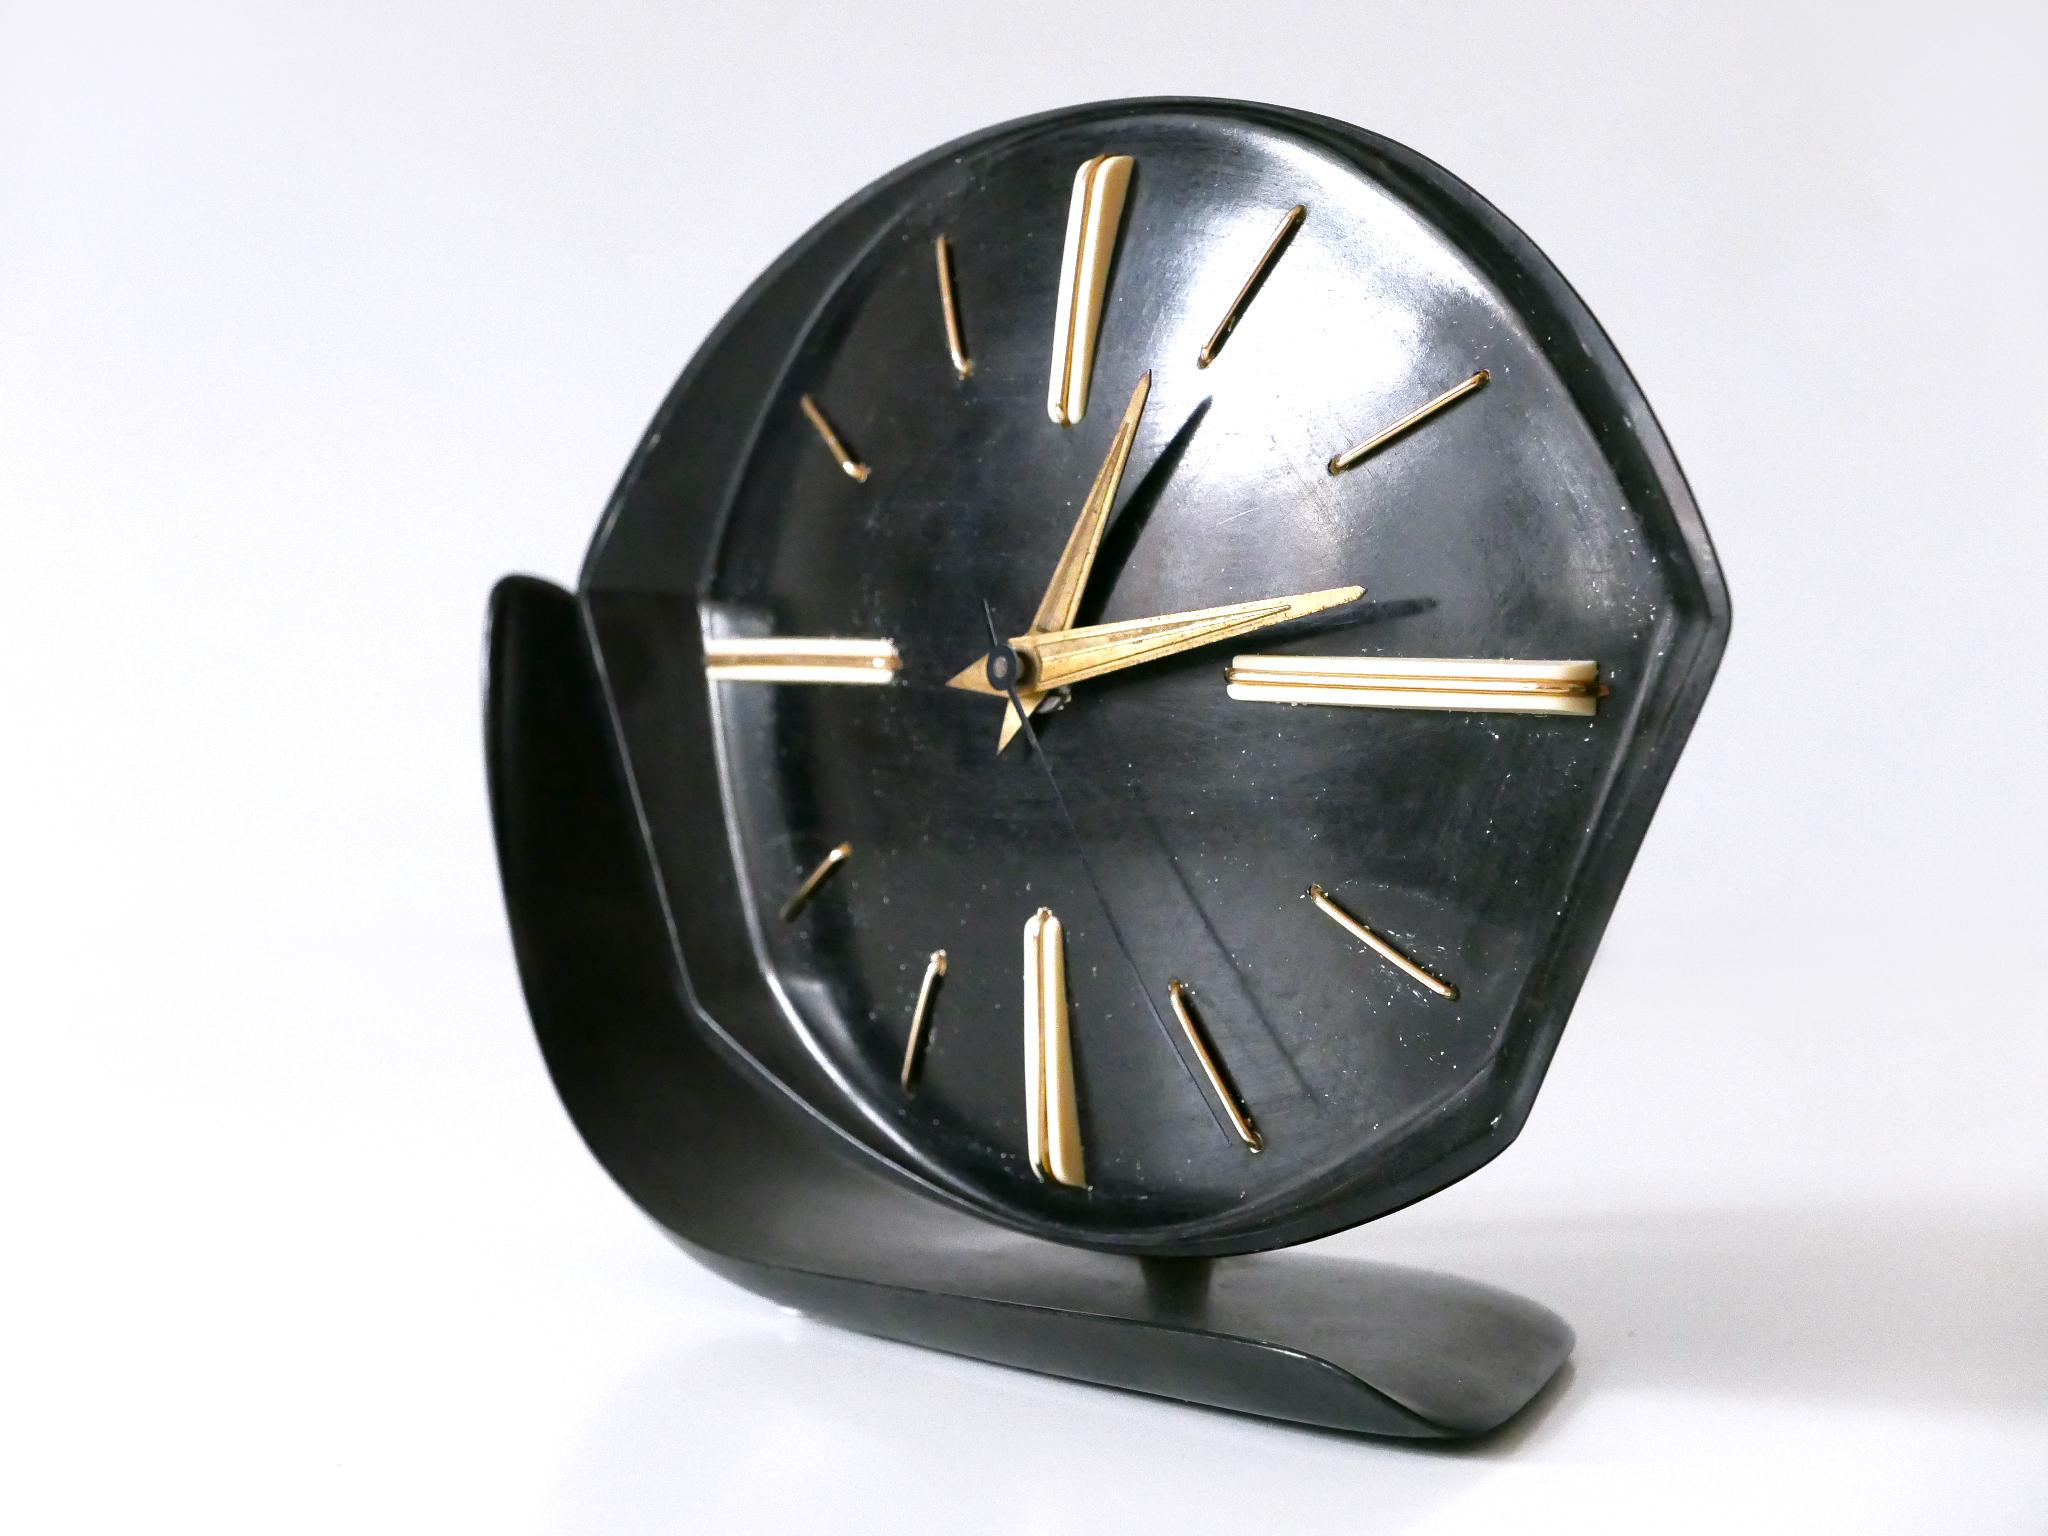 Czech Rare and Lovely Mid-Century Modern Bakelite Table or Wall Clock by PRIM 1950s For Sale